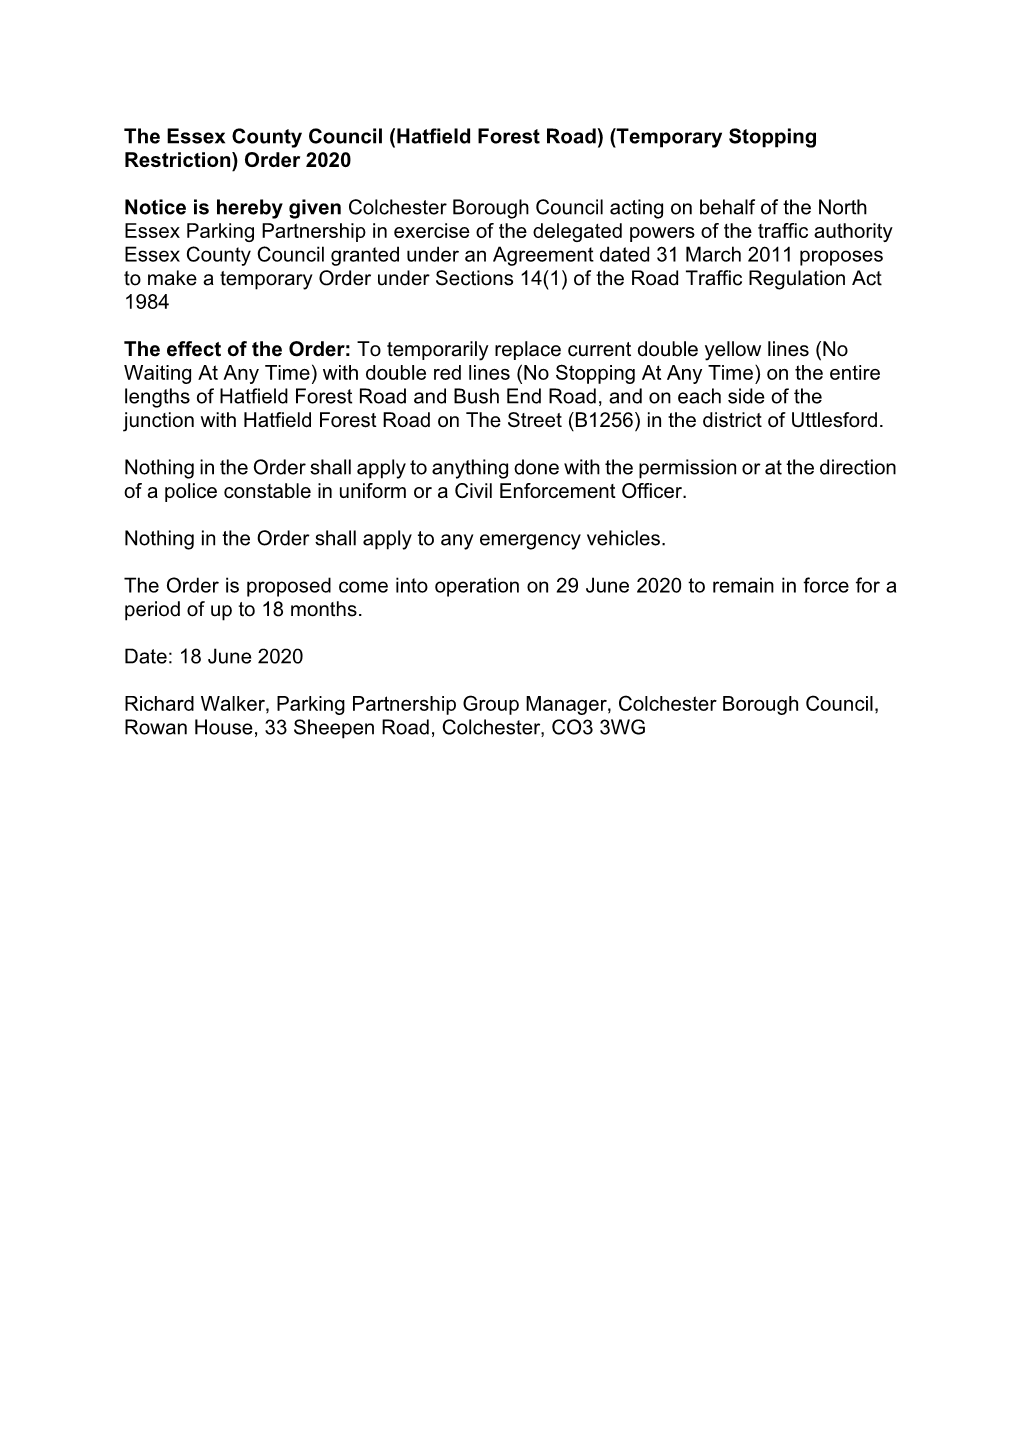 The Essex County Council (Hatfield Forest Road) (Temporary Stopping Restriction) Order 2020